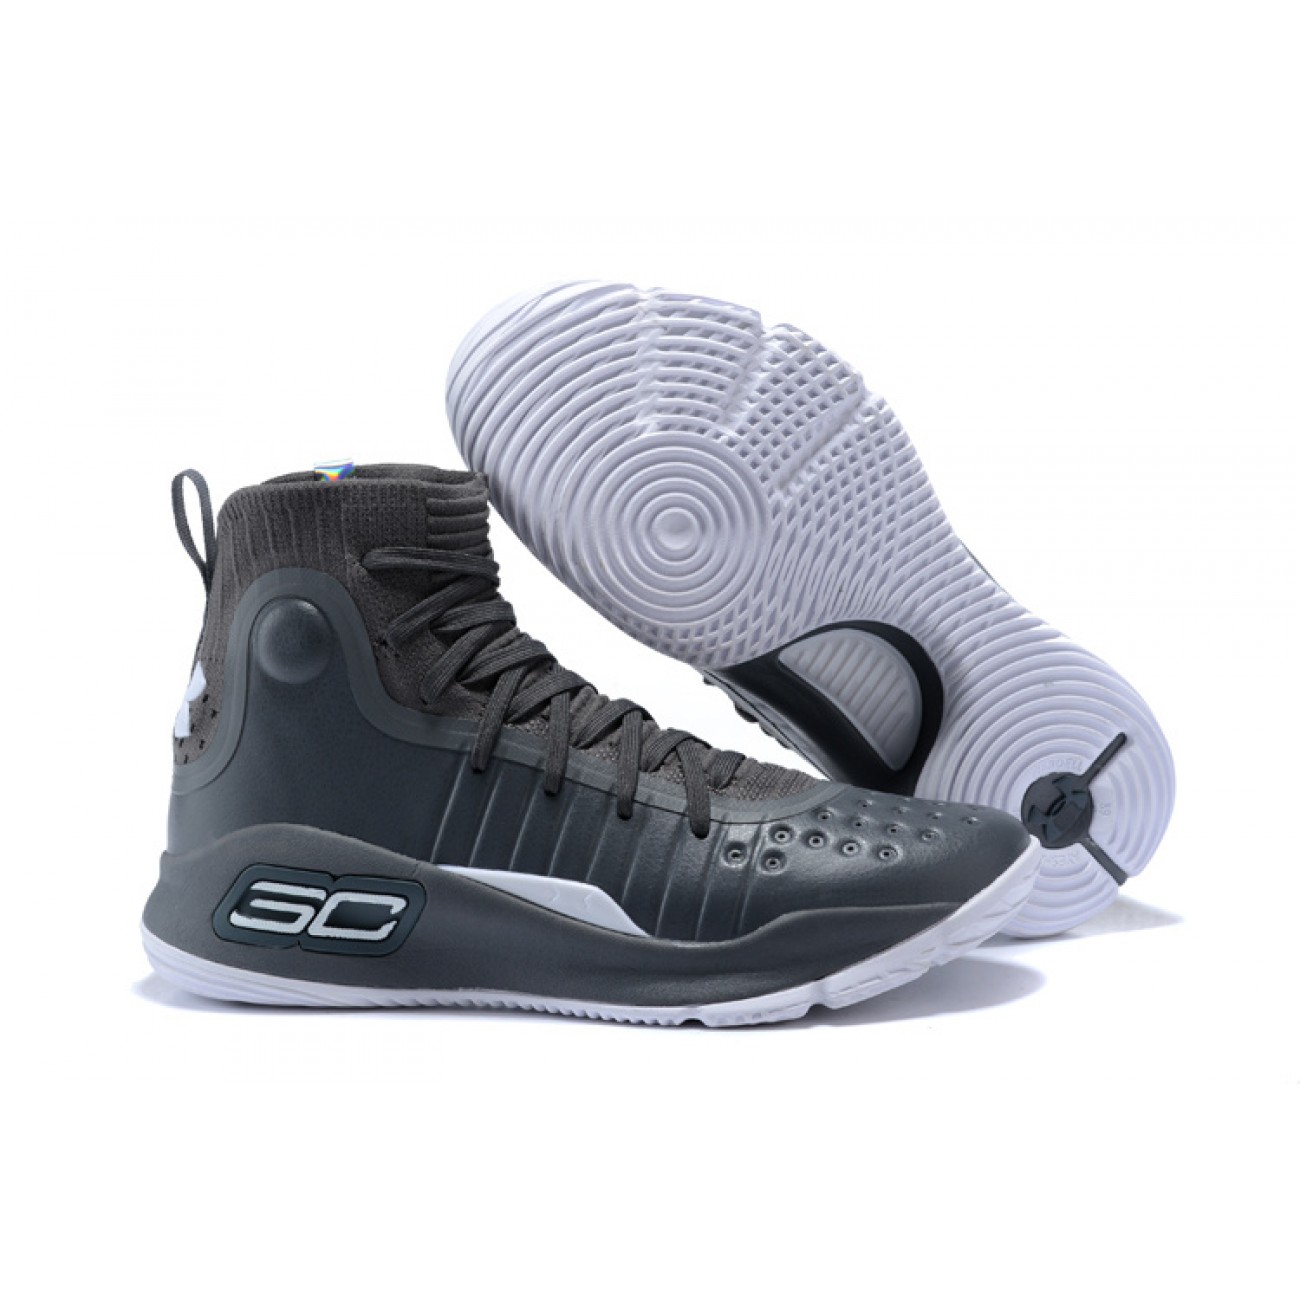 Under Armour UA Curry 4 Charcoal Grey/White